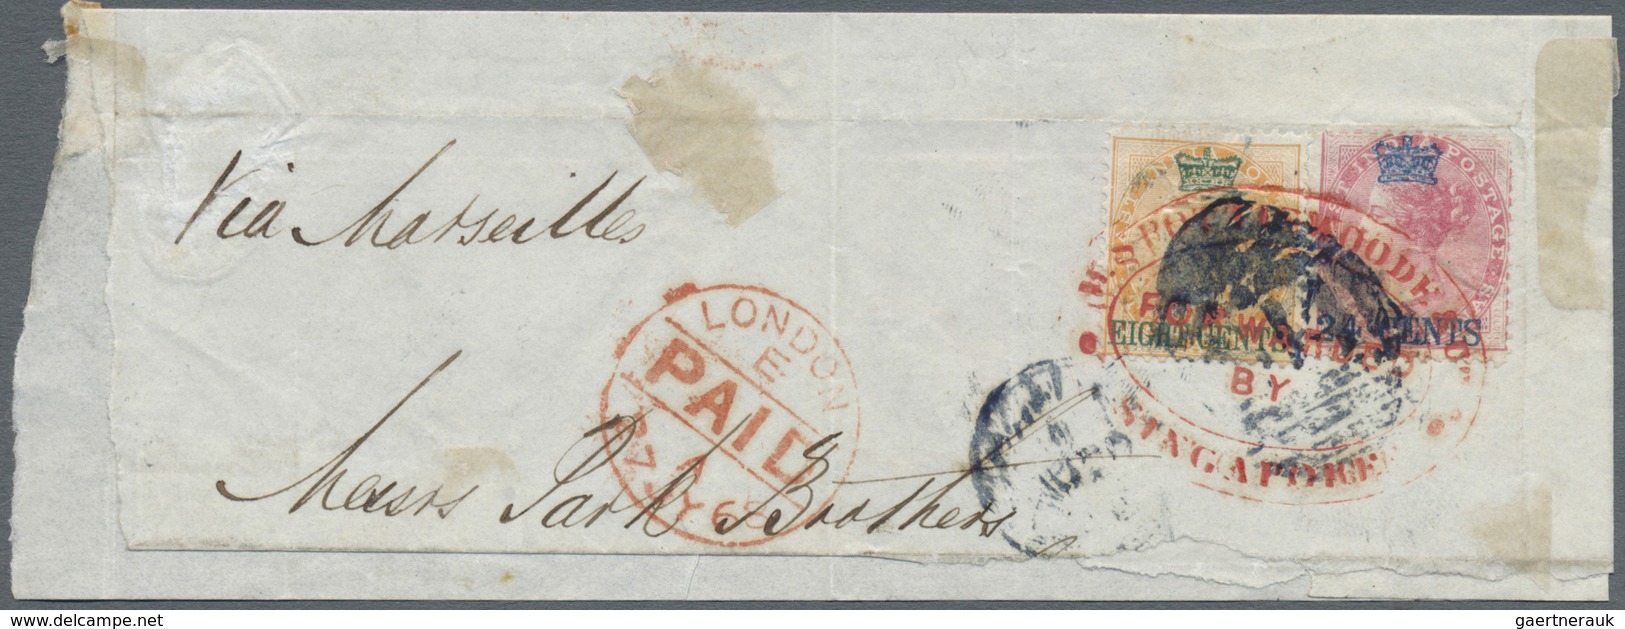 Brfst Malaiische Staaten - Straits Settlements: 1868. Large Piece Addressed To London Bearing Straits Sett - Straits Settlements